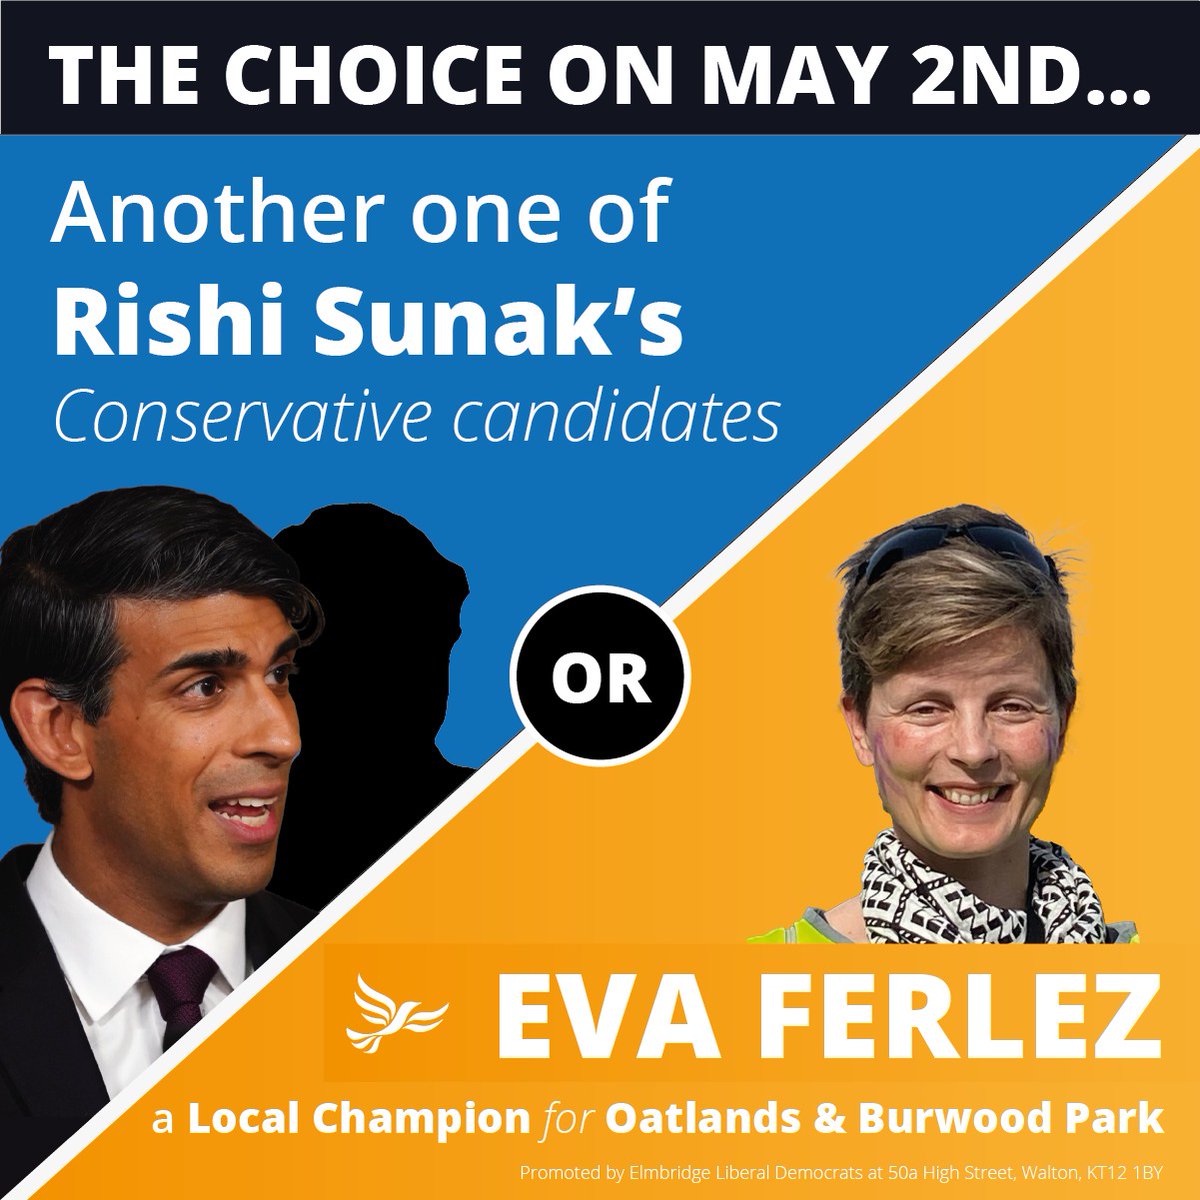 #oatlandsandburwoodpark residents - help make change one step at a time by voting for me on Thursday, and send the Tory candidate running (again!) to find another 'safe space' - not in #Oatlands, not this time! 
#evaforoatlands #mayelection #fairdeal